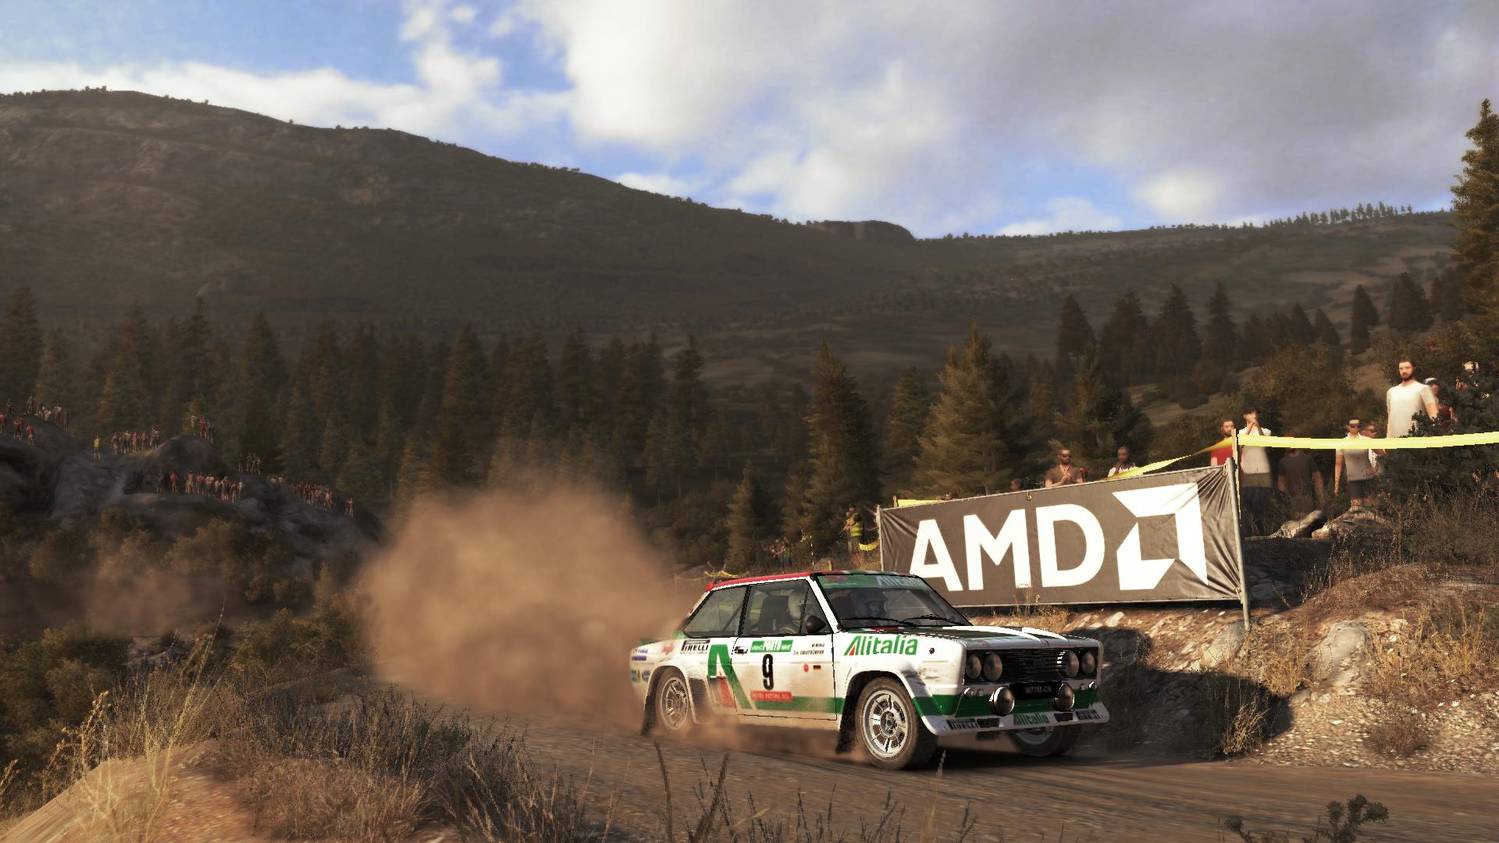 dirt rally game